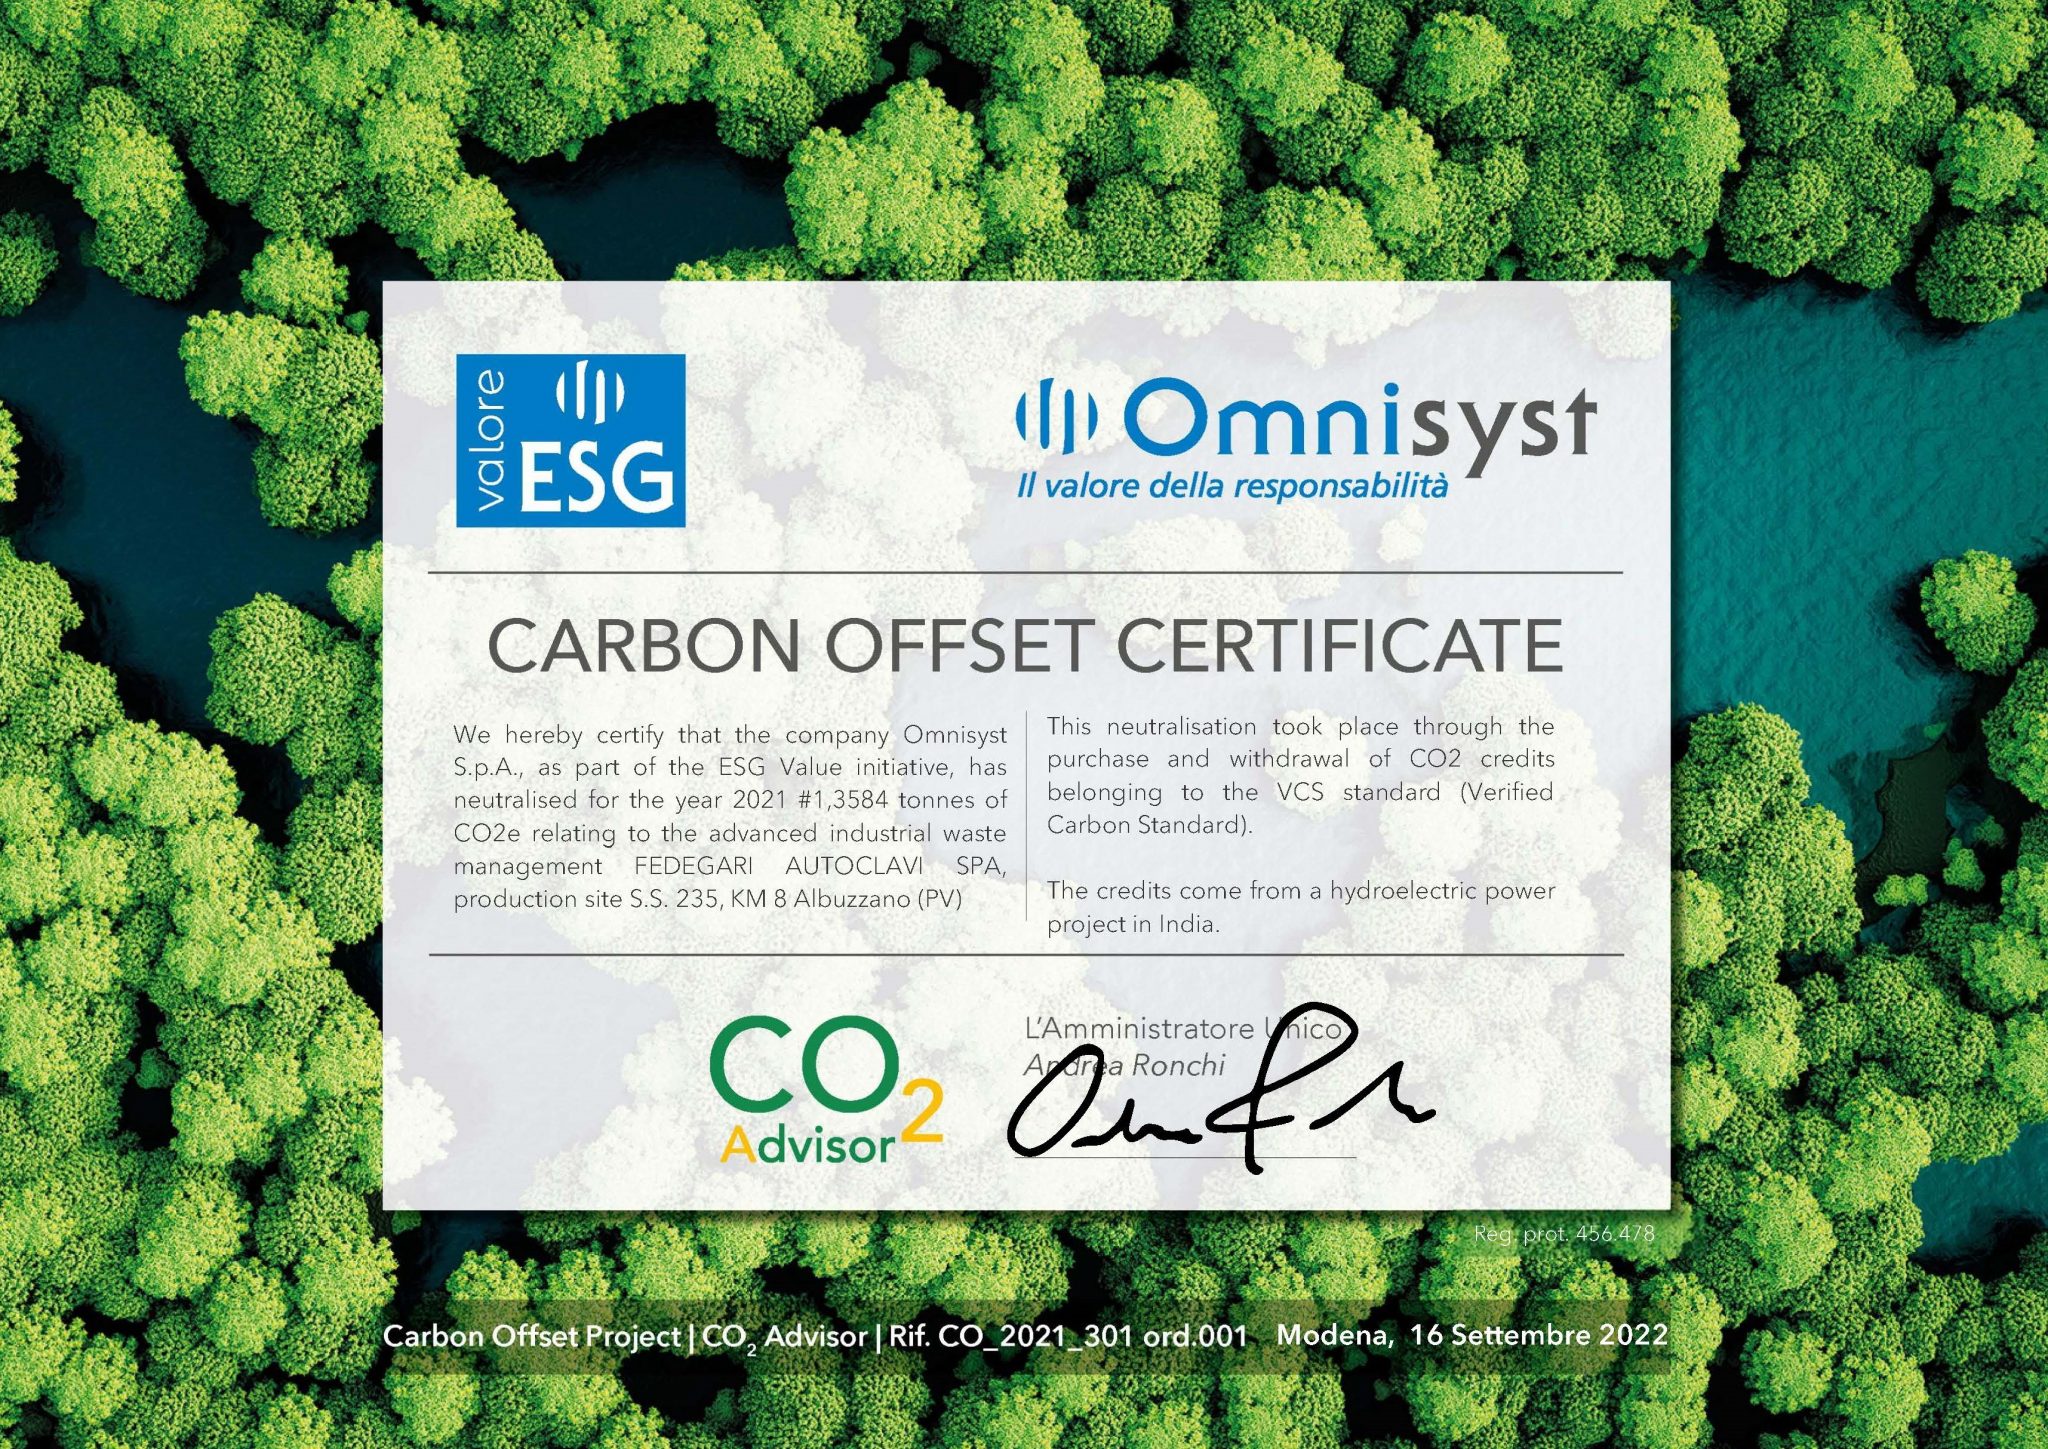 Carbon offset certificate for responsible industrial waste management